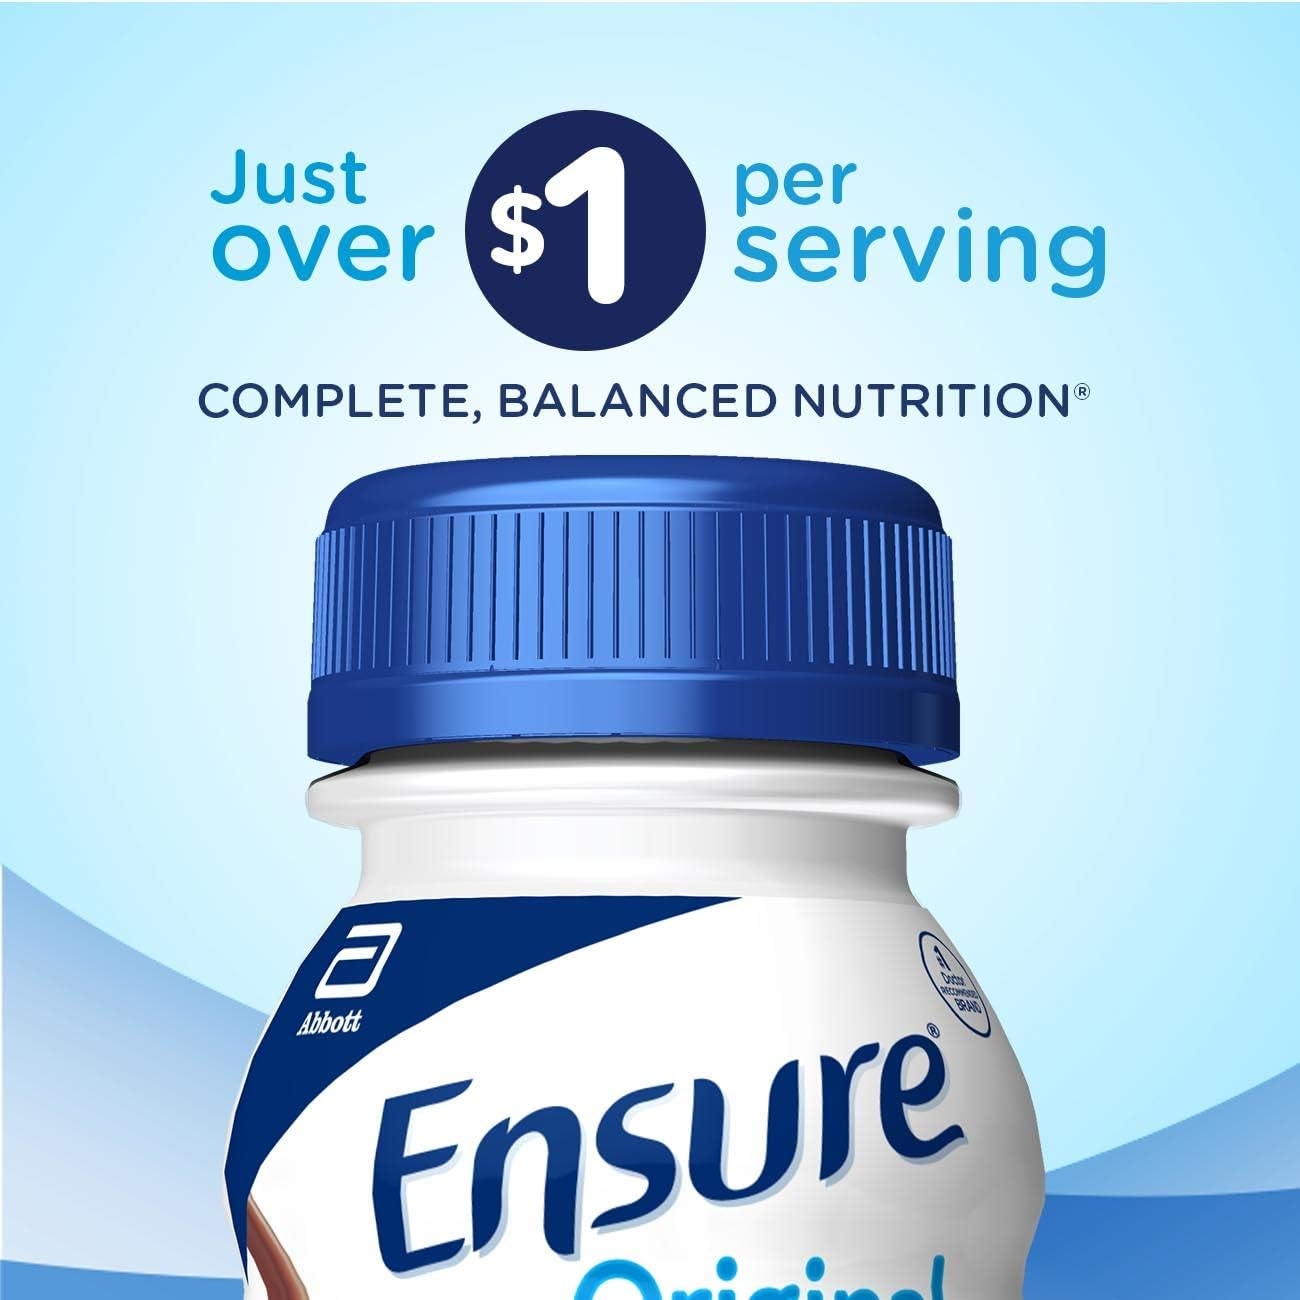 Ensure Original Nutrition Shake with 9 grams of protein, Meal Replacement Shakes, Milk Chocolate, 8 fl oz, 24 Count